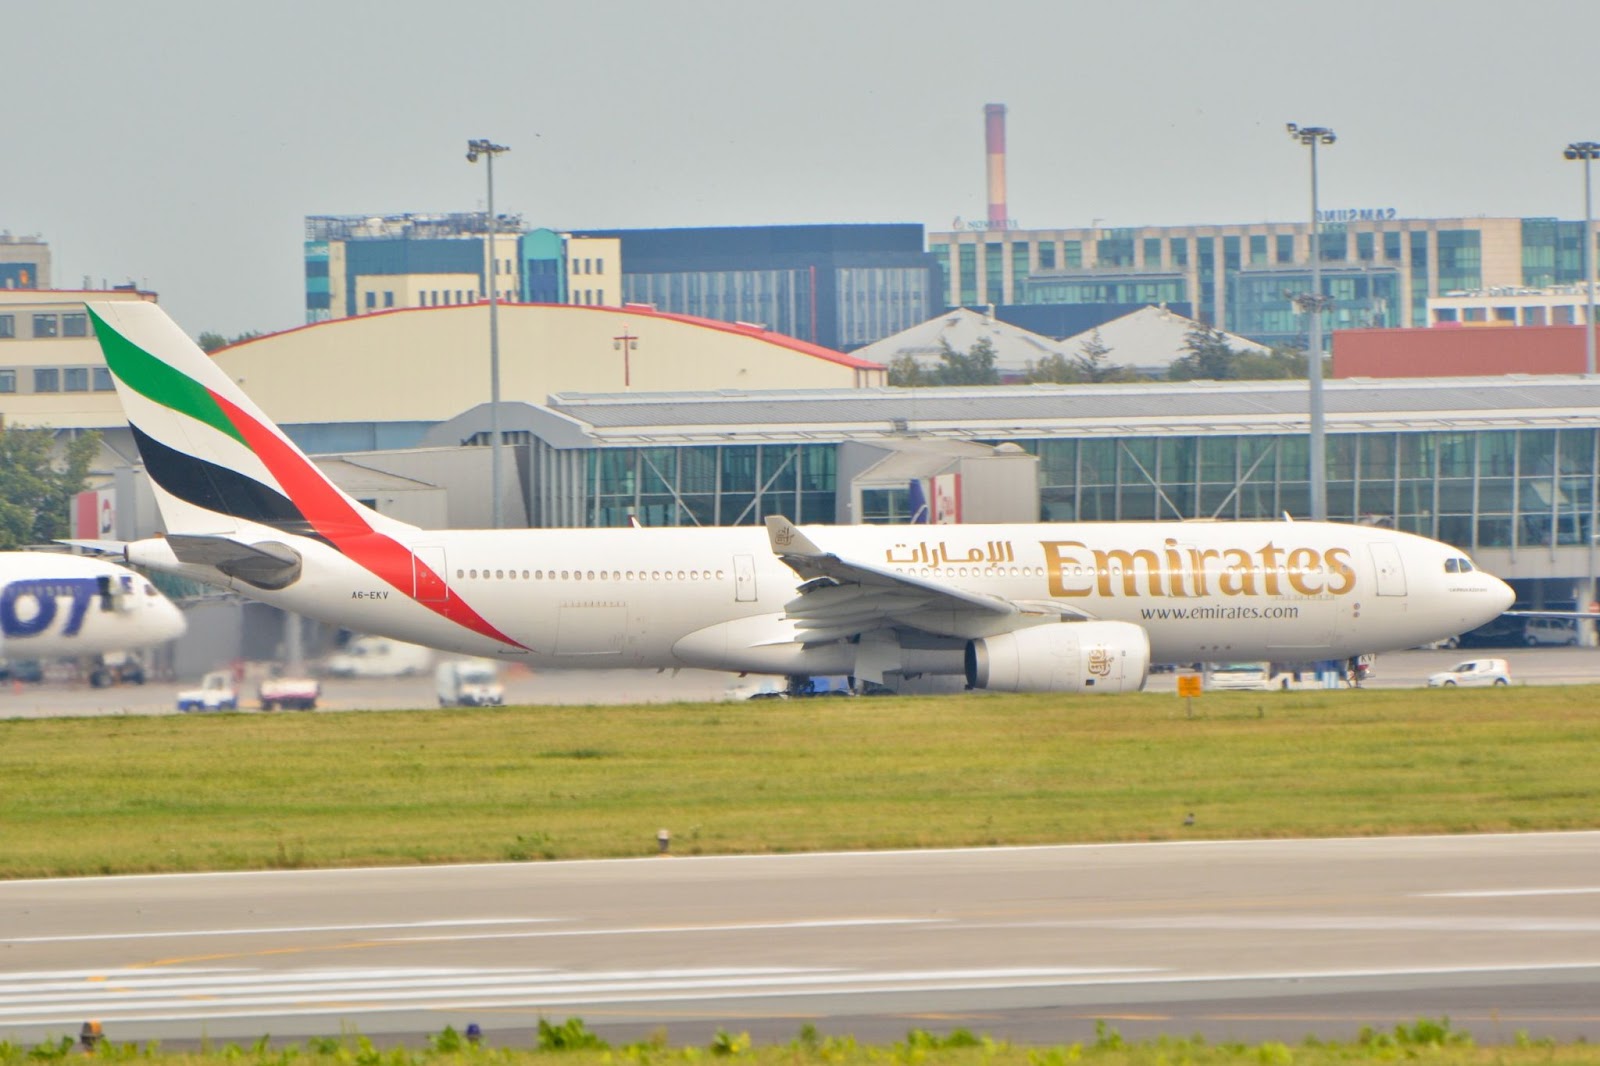 Emirates Executive Shares Travel Tips for Jet Lag and Packing